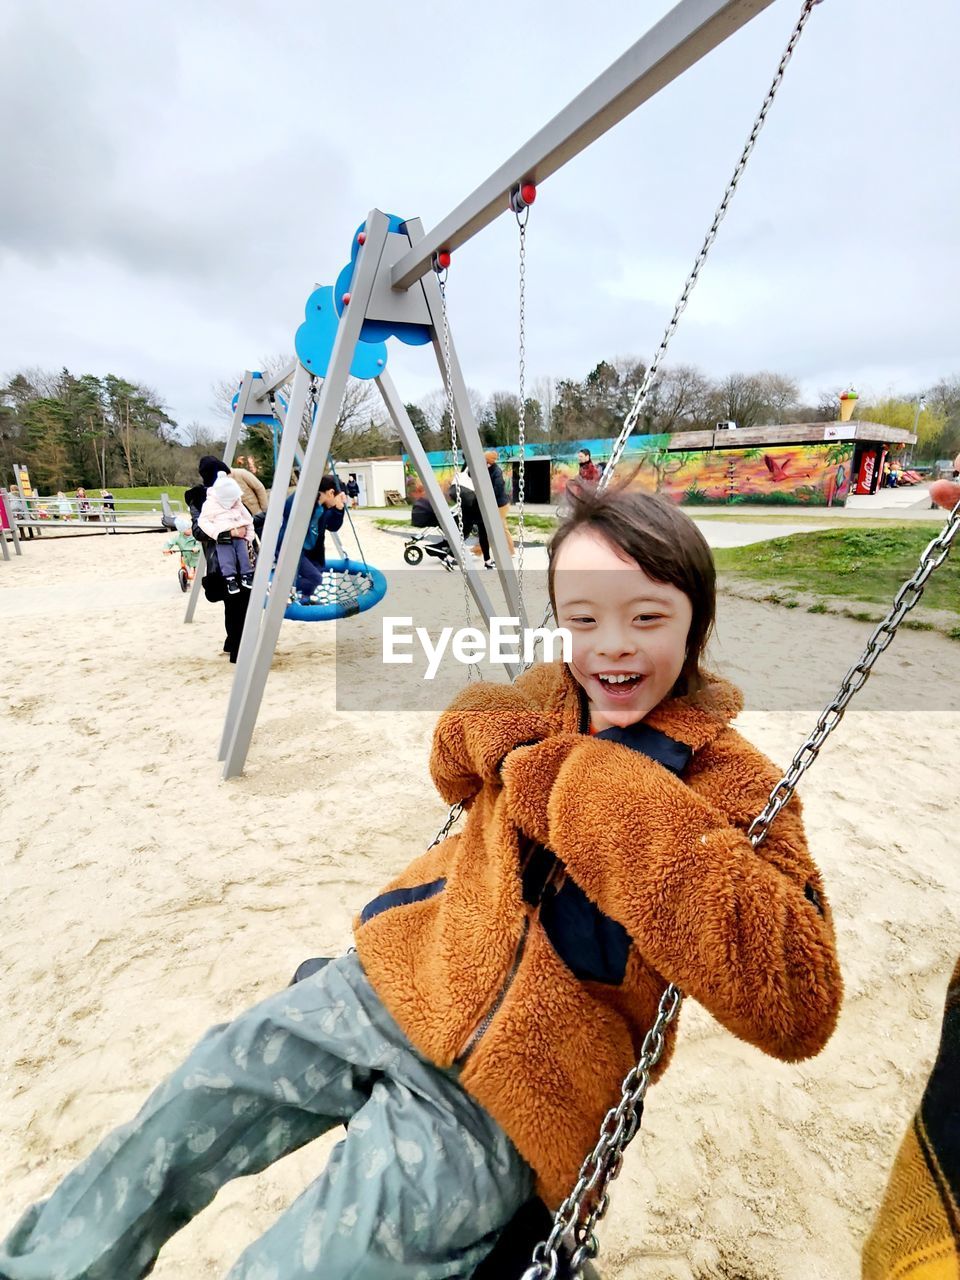 smiling, happiness, playground, one person, swing, women, nature, emotion, fun, childhood, leisure activity, enjoyment, sky, child, outdoor play equipment, female, day, adult, rope, portrait, smile, teeth, cheerful, sunlight, lifestyles, cloud, land, casual clothing, outdoors, looking at camera, clothing, holding, carefree, person, joy, sitting, trip, vacation, holiday, sand, positive emotion, beach, full length, young adult